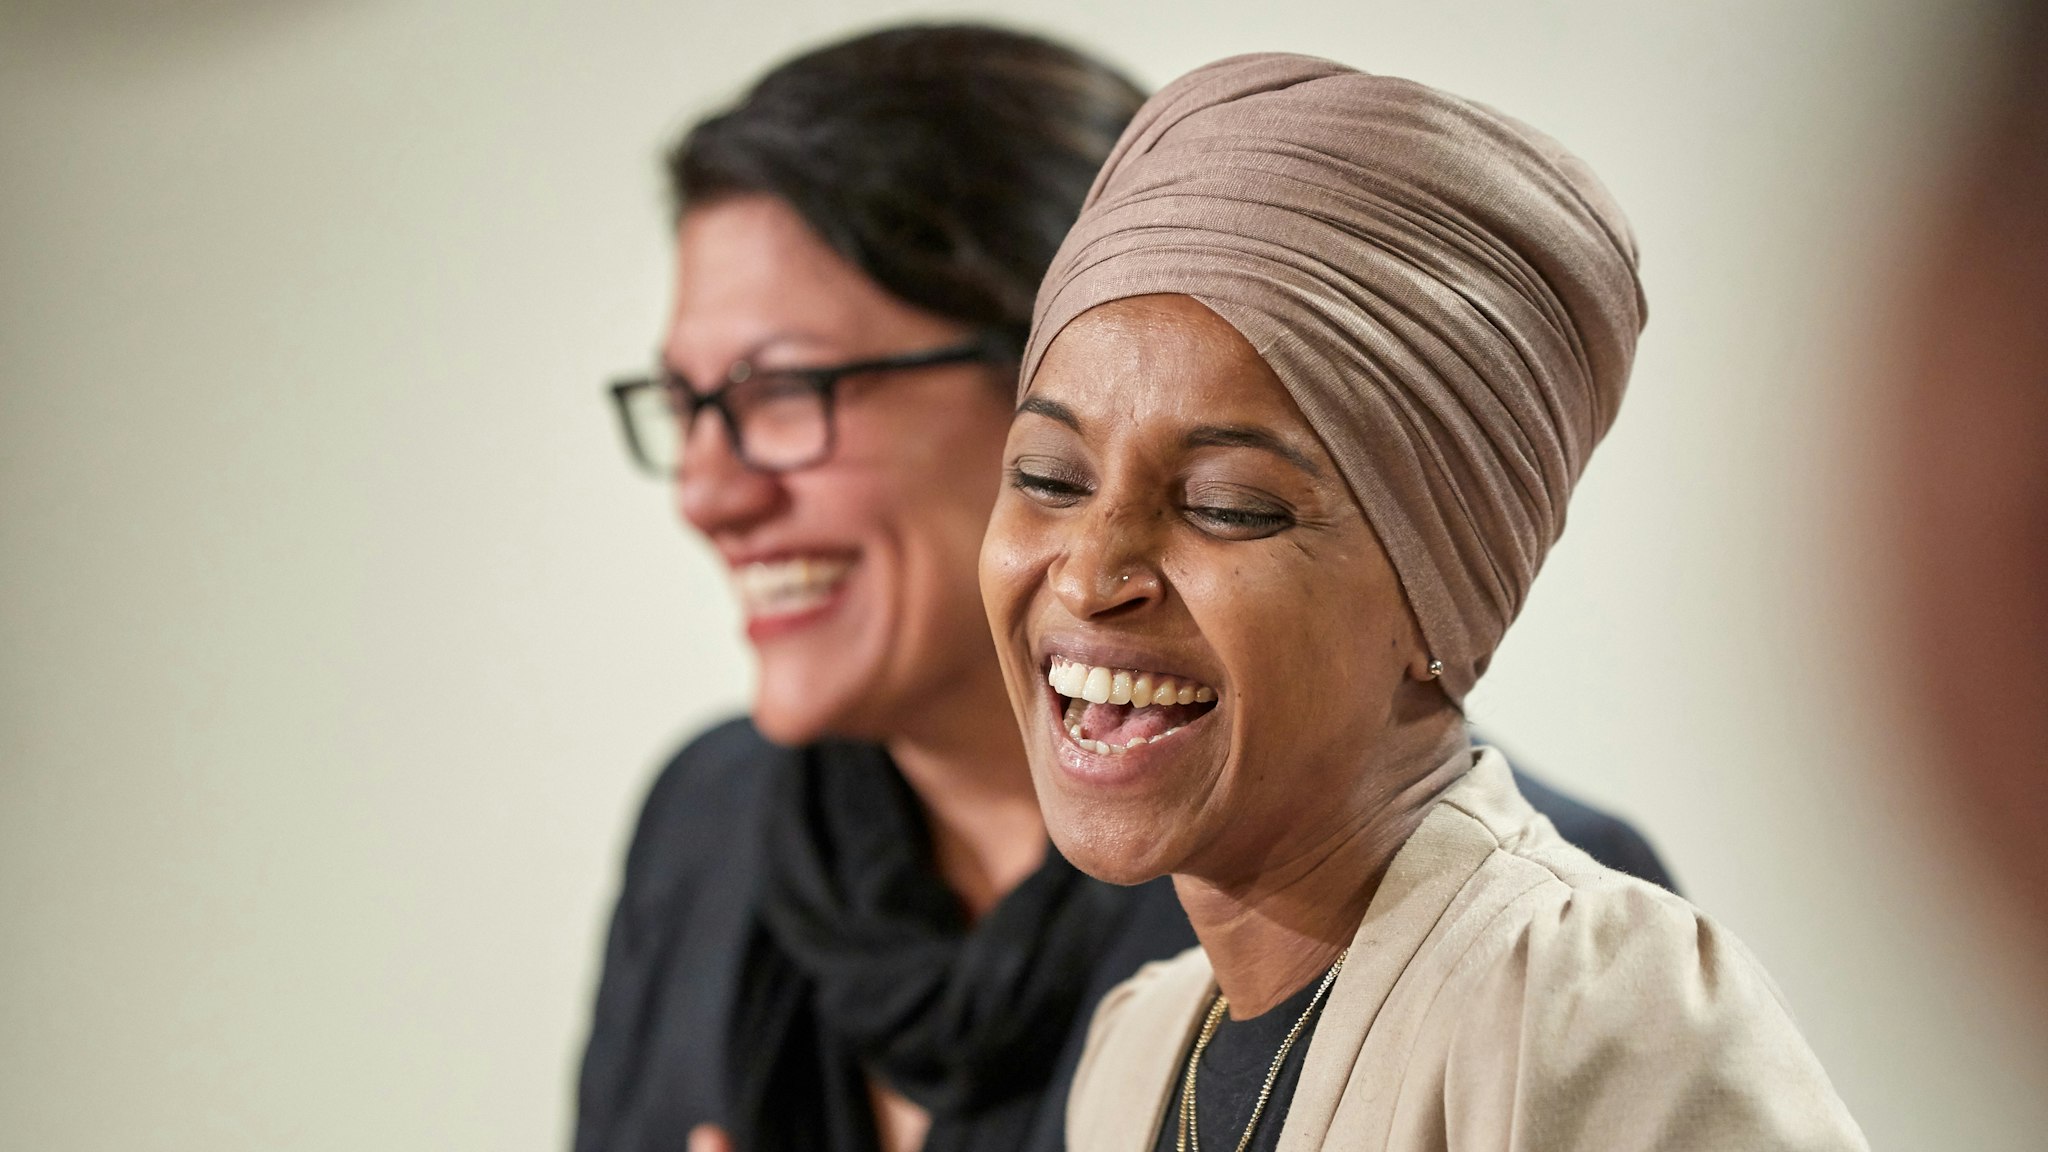 ST PAUL, MN - AUGUST 19: U.S. Reps. Ilhan Omar (D-MN) and Rashida Tlaib (D-MI) hold a news conference on August 19, 2019 in St. Paul, Minnesota. Israeli Prime Minister Benjamin Netanyahu blocked a planned trip by Omar and Tlaib to visit Israel and Palestine citing their support for the boycott, divestment, and sanctions (BDS) movement against Israel.